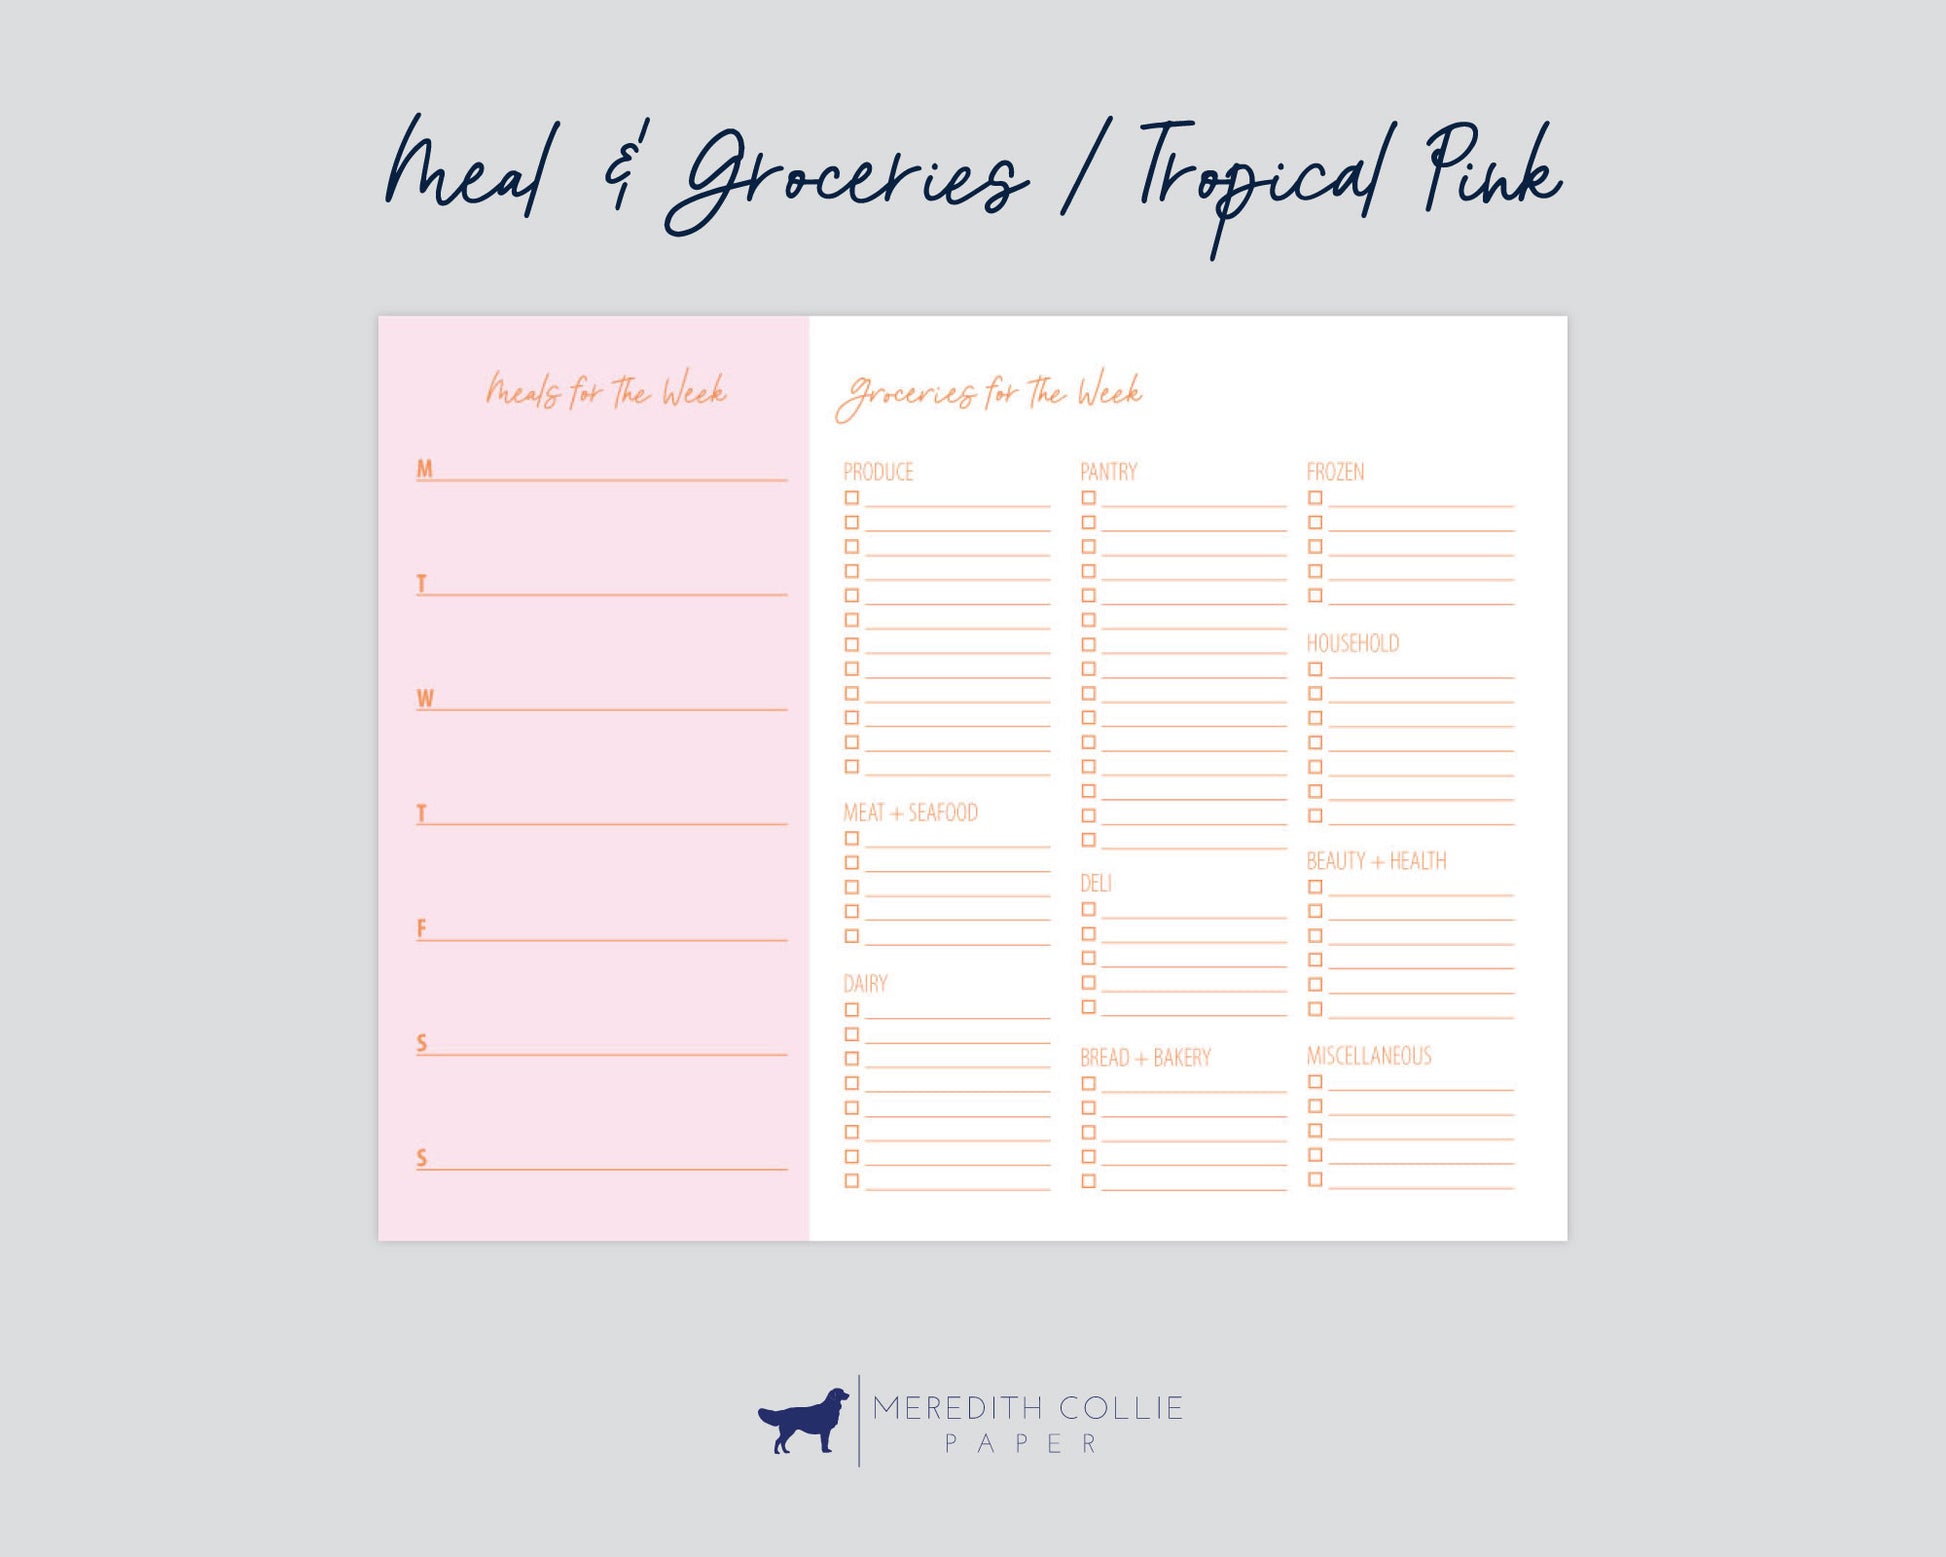 meals and groceries for the week planner, tropical pink, Meredith Collie paper